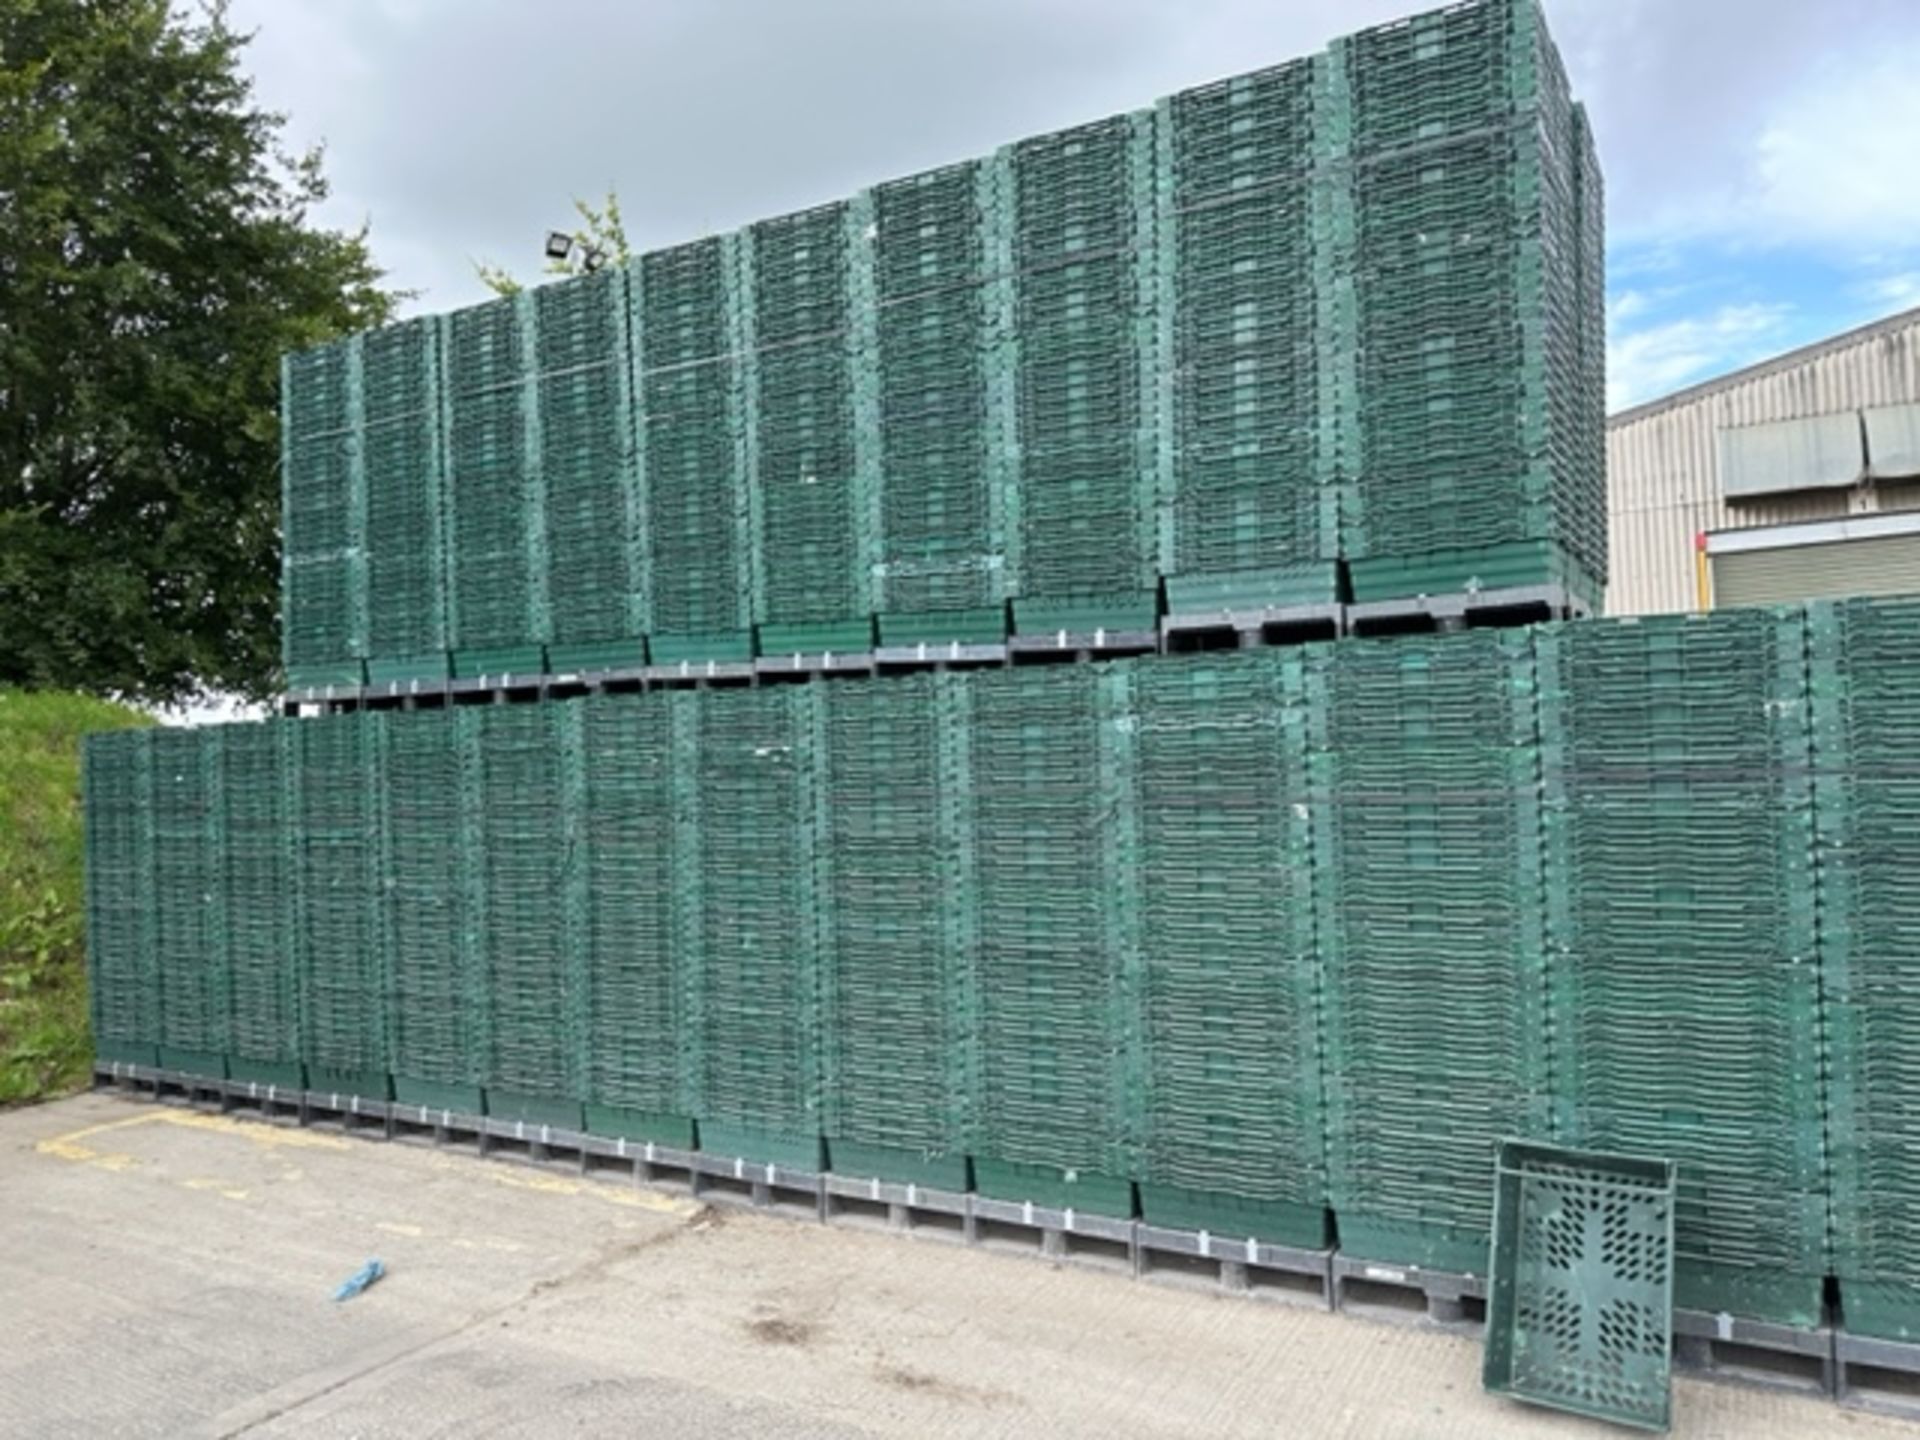 2 x HALF PALLETS CONTAINING 2 STACKS OF 70 TRAYS. (140 TRAYS). - Image 3 of 3